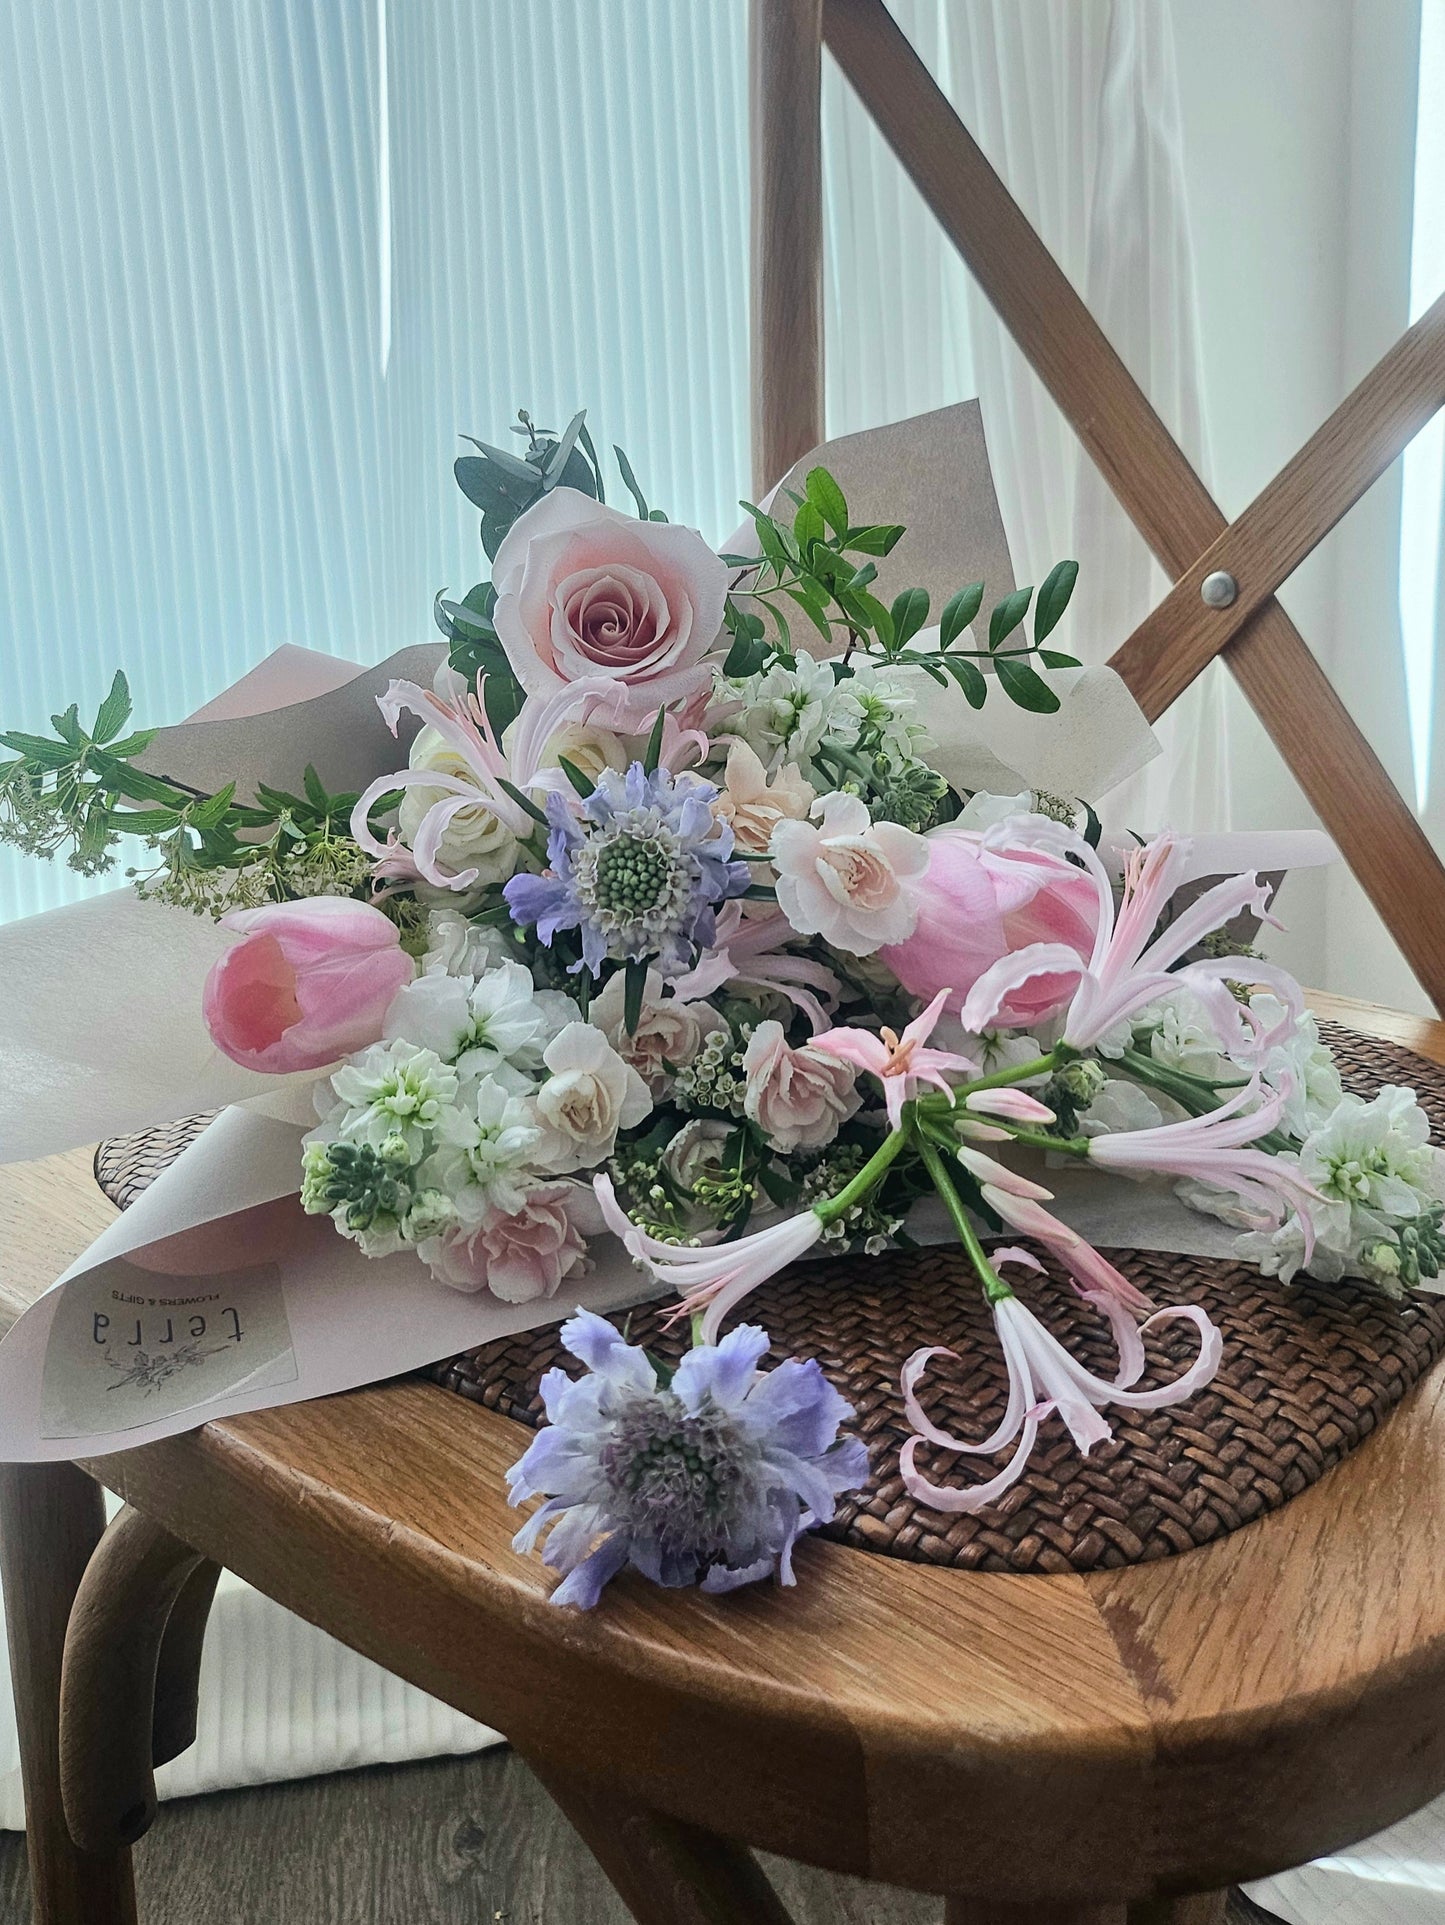 Mother's Day Special - Whimsical Wonder Bouquet